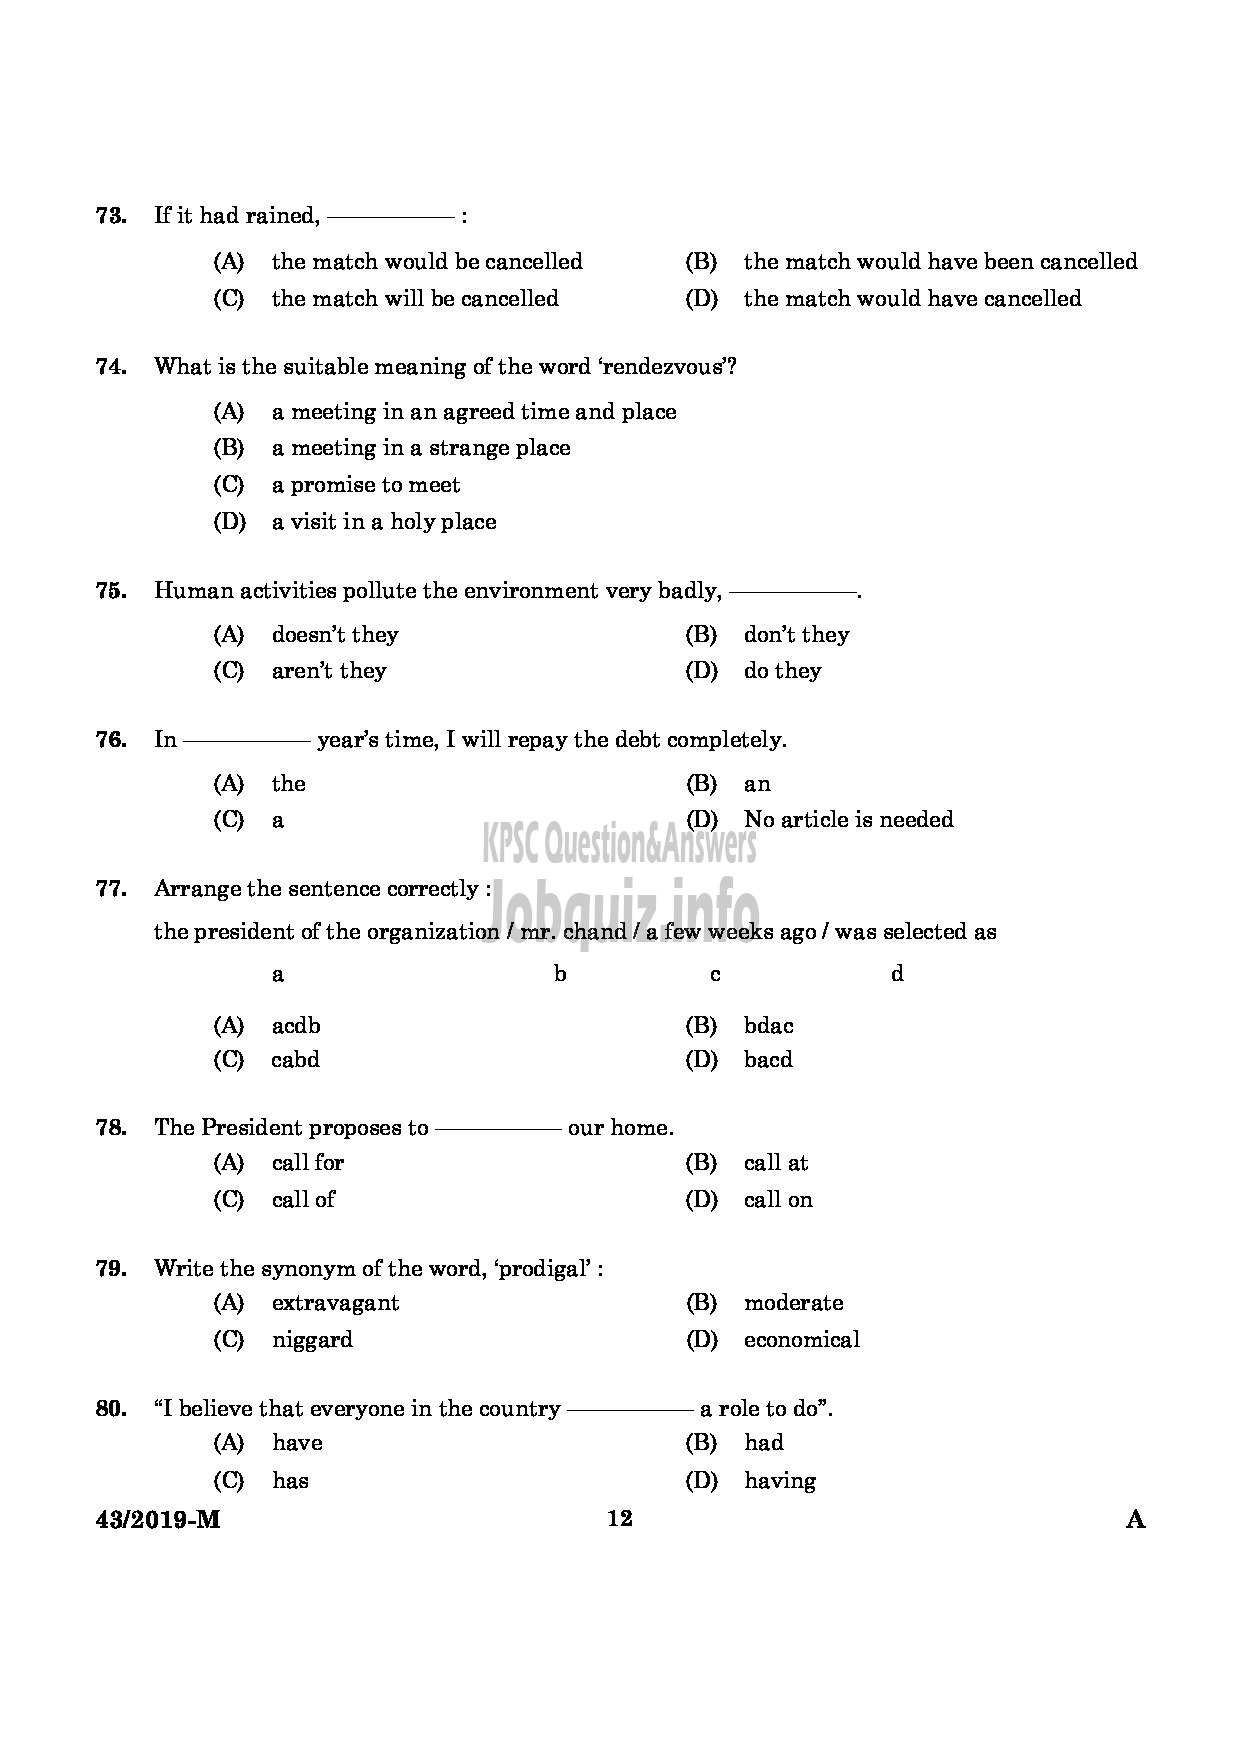 Kerala PSC Question Paper - Deputy Collector (SR For SC/ST) Land Revenue Department English / Malayalam -10